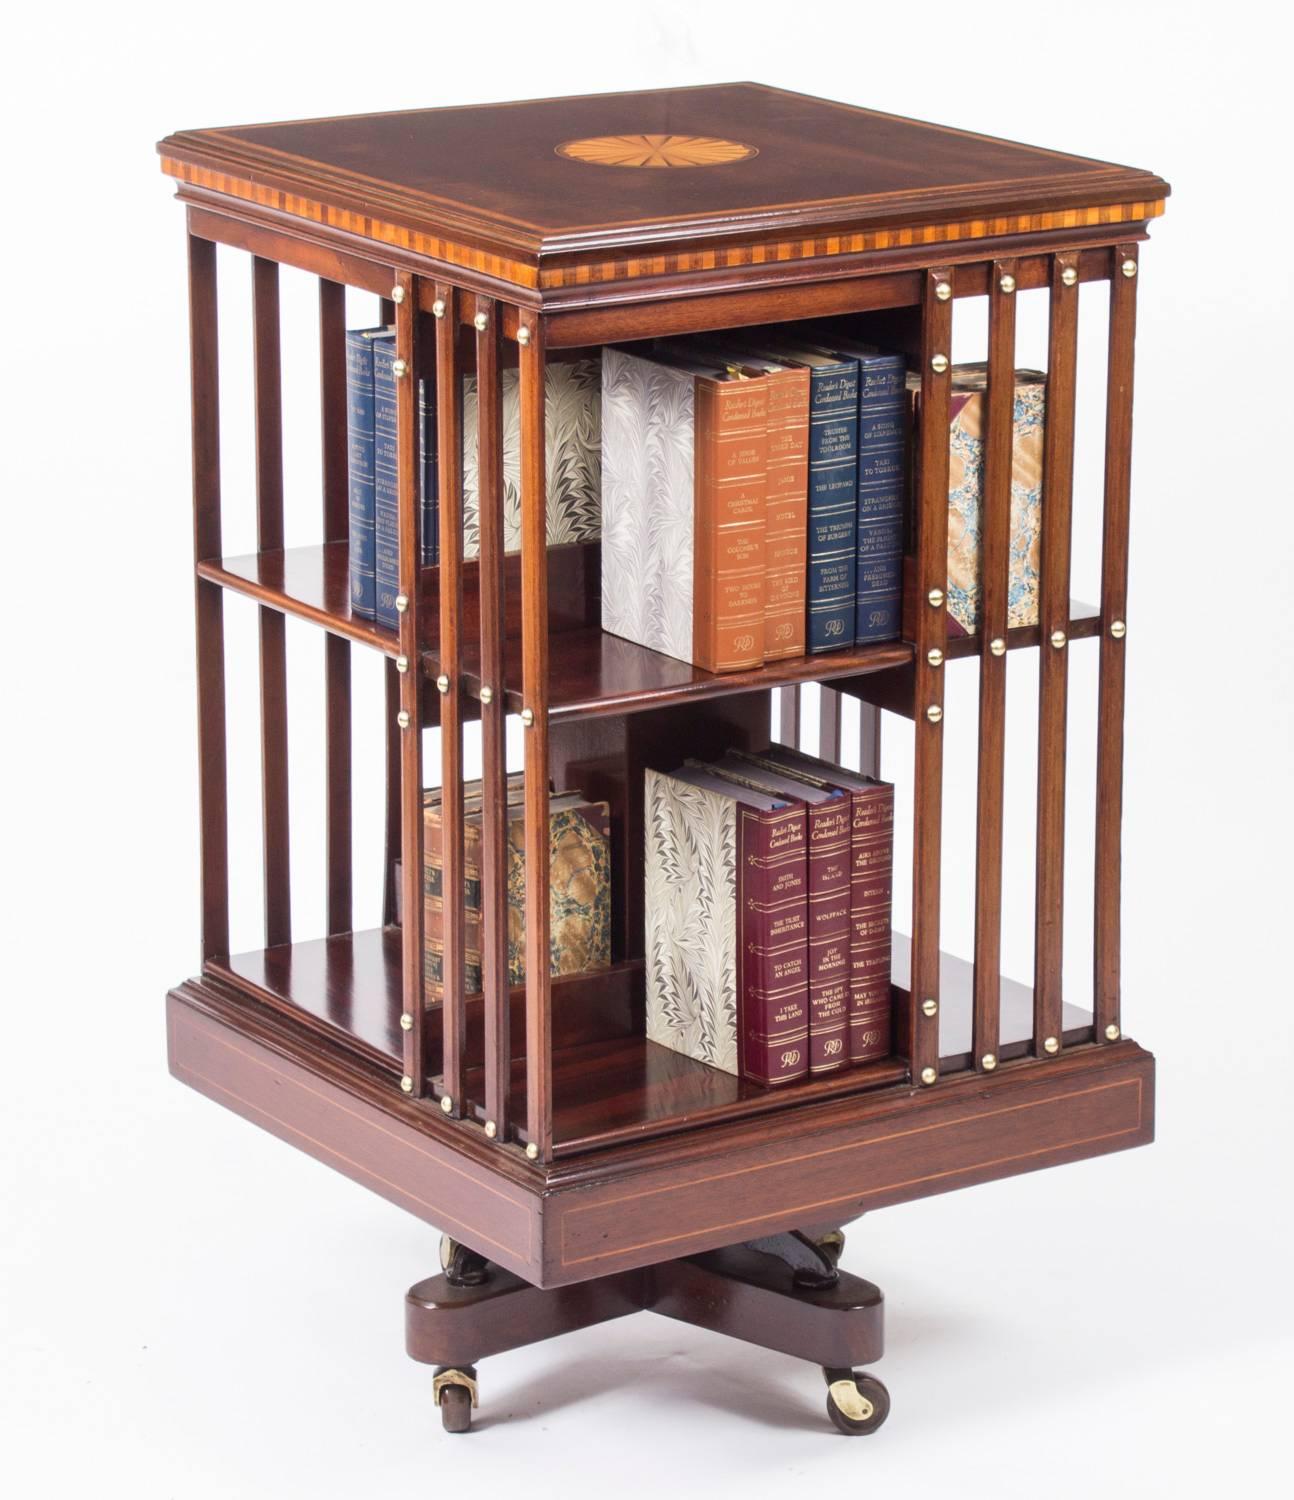 This an exquisite antique revolving bookcase attributed to the renowned retailer and manufacturer Maple & Co., circa 1890 in date.

It is made of mahogany , revolves on a solid cast iron base, has inlaid boxwood lines to the top and bottom, the top